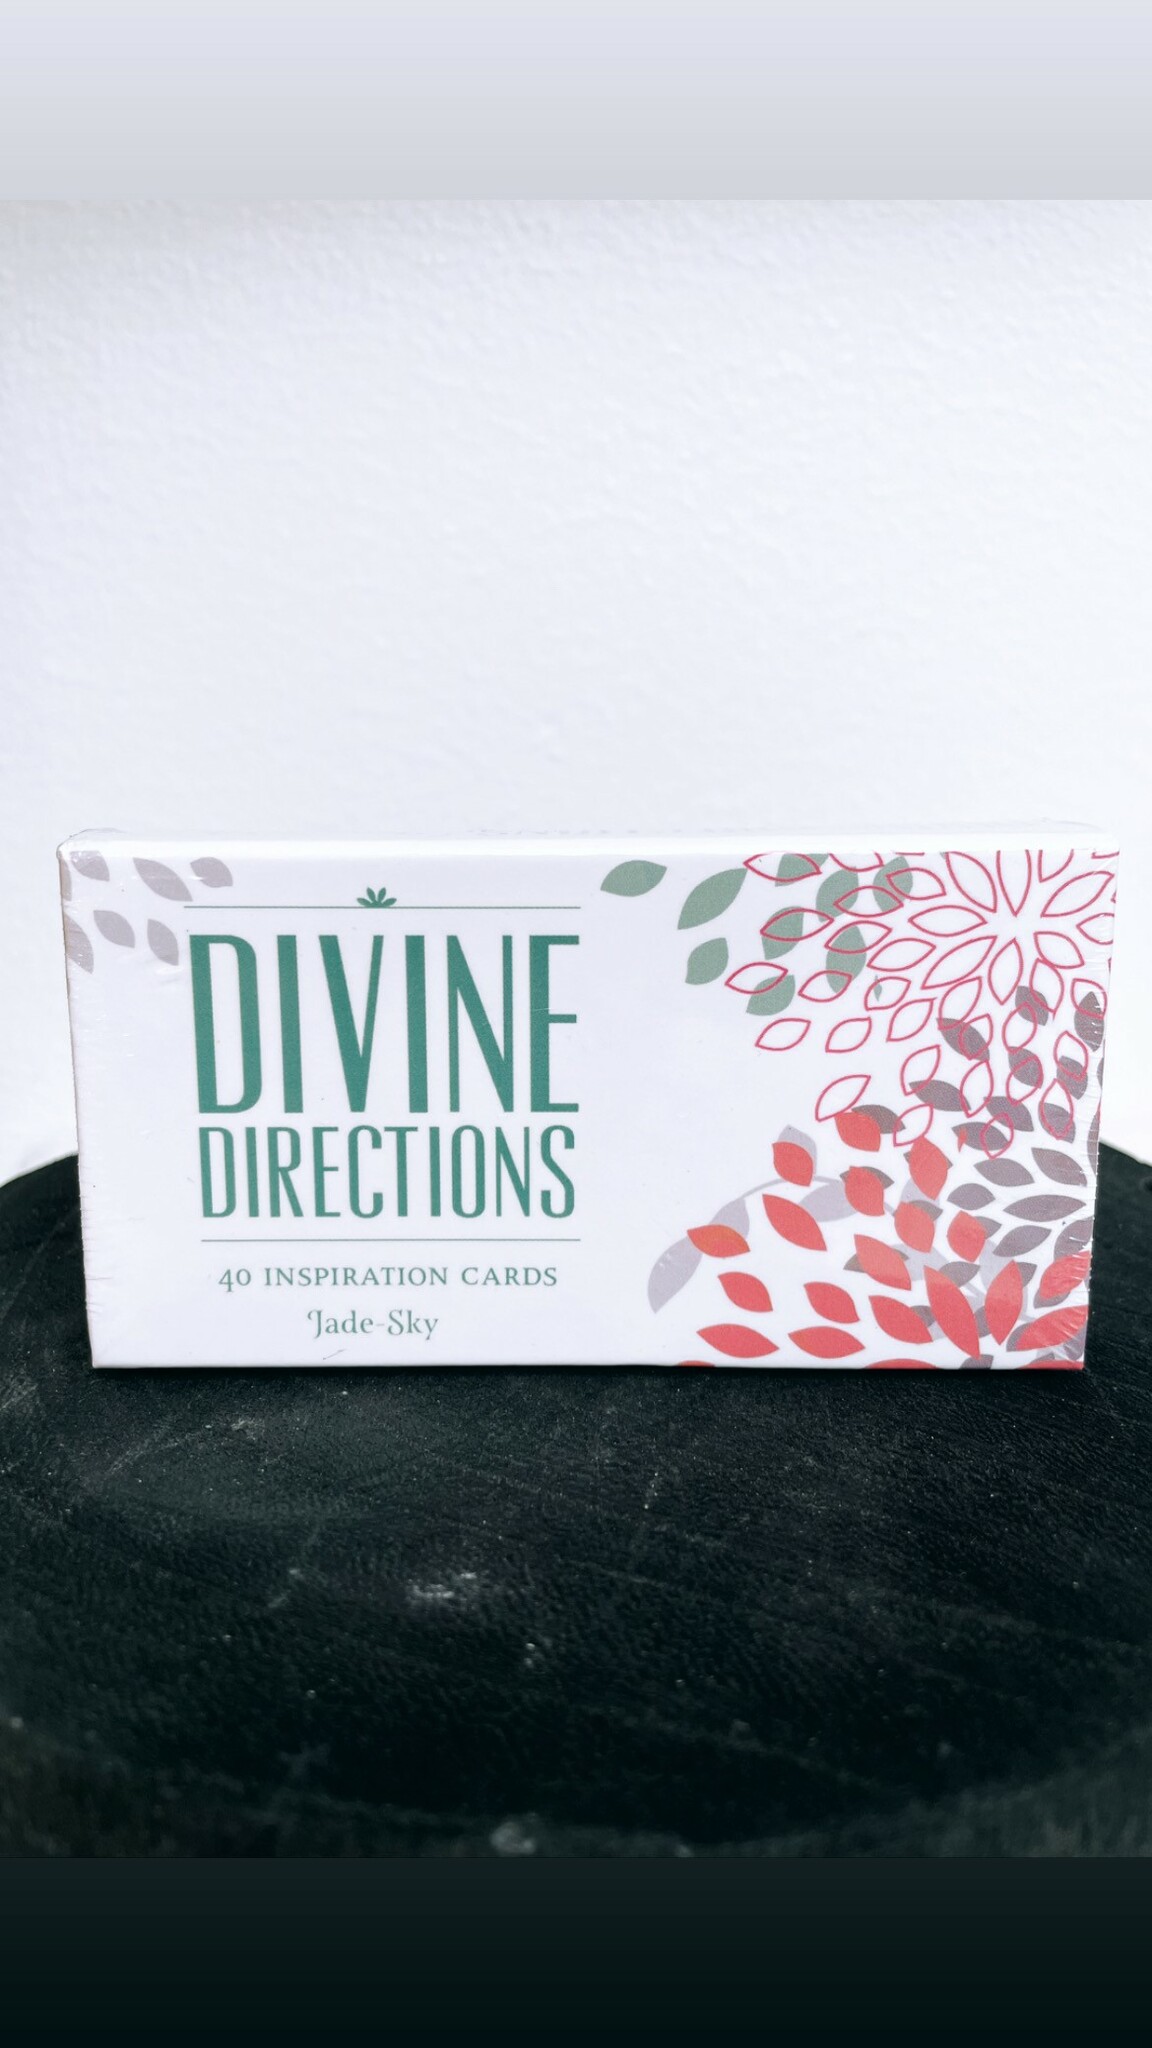 Divine Directions 40 Inspiration Cards